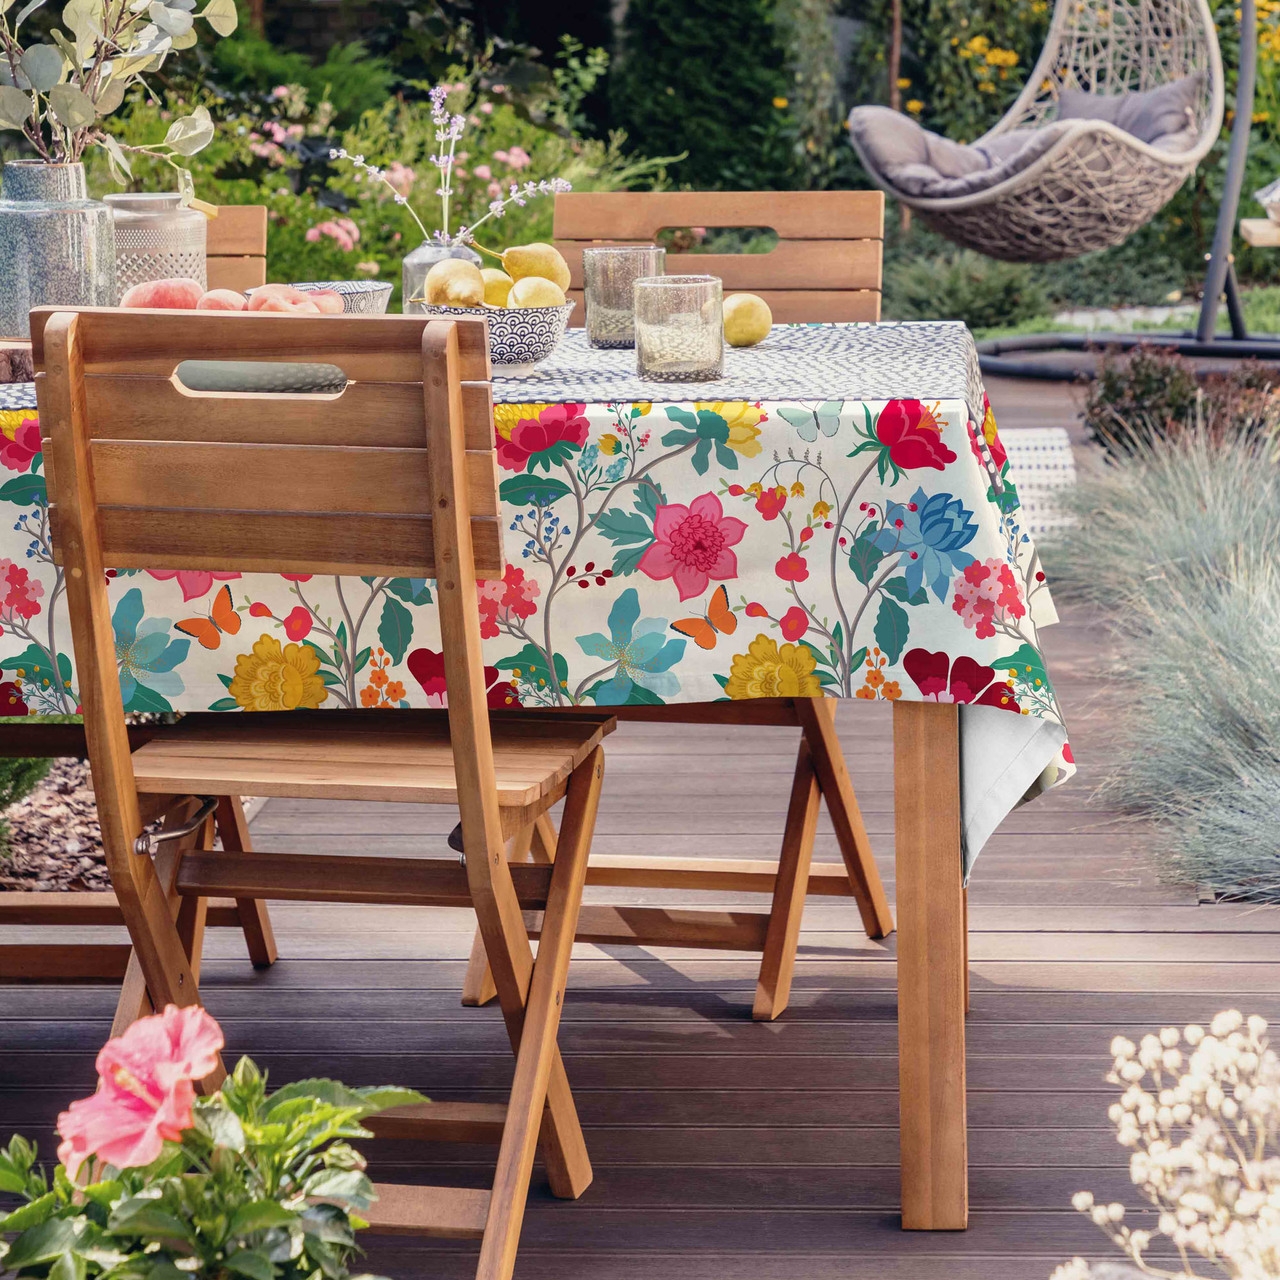 Celina Digby Luxury Outdoor Garden Tablecloth AVAILABLE IN 5 SIZES – Optional Centre Hole for Parasol Midsummer Morning XXL (300cm x 140cm)